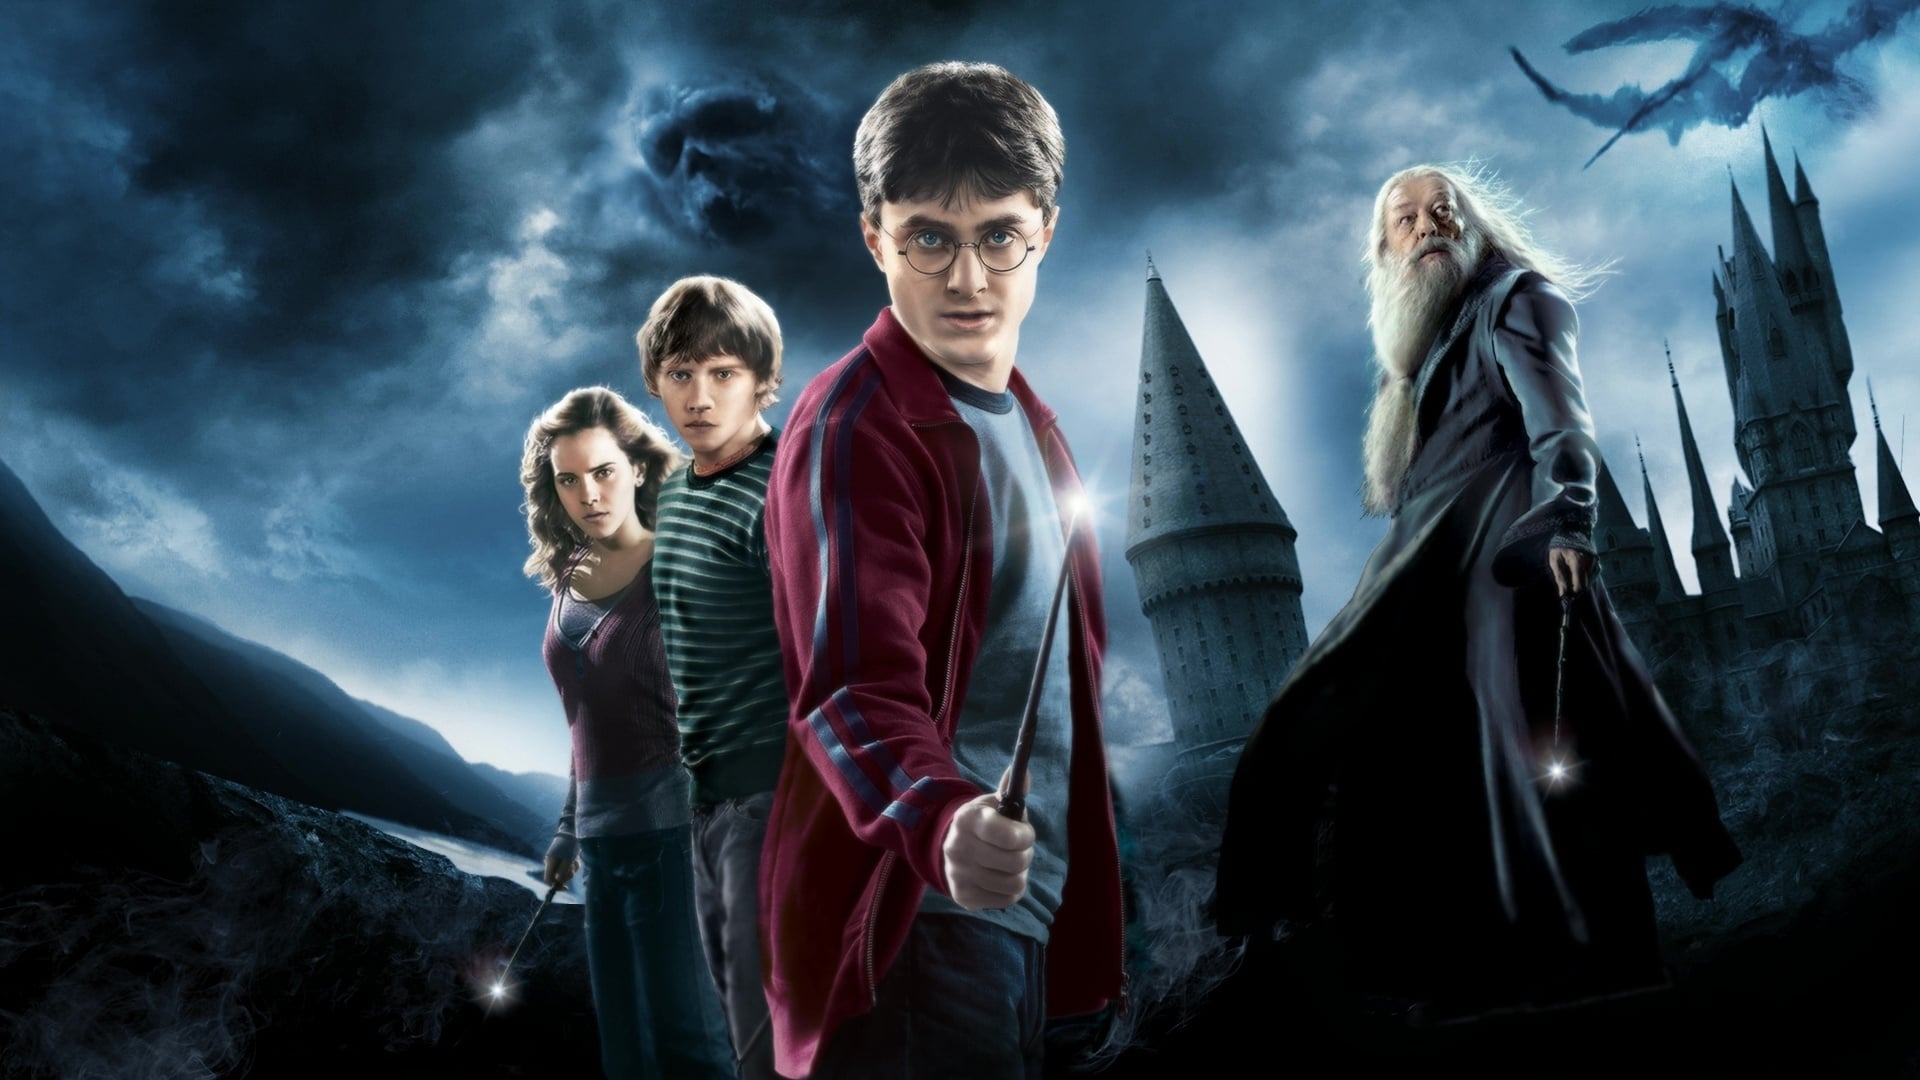 Harry Potter và Hoàng Tử Lai - Harry Potter and the Half-Blood Prince